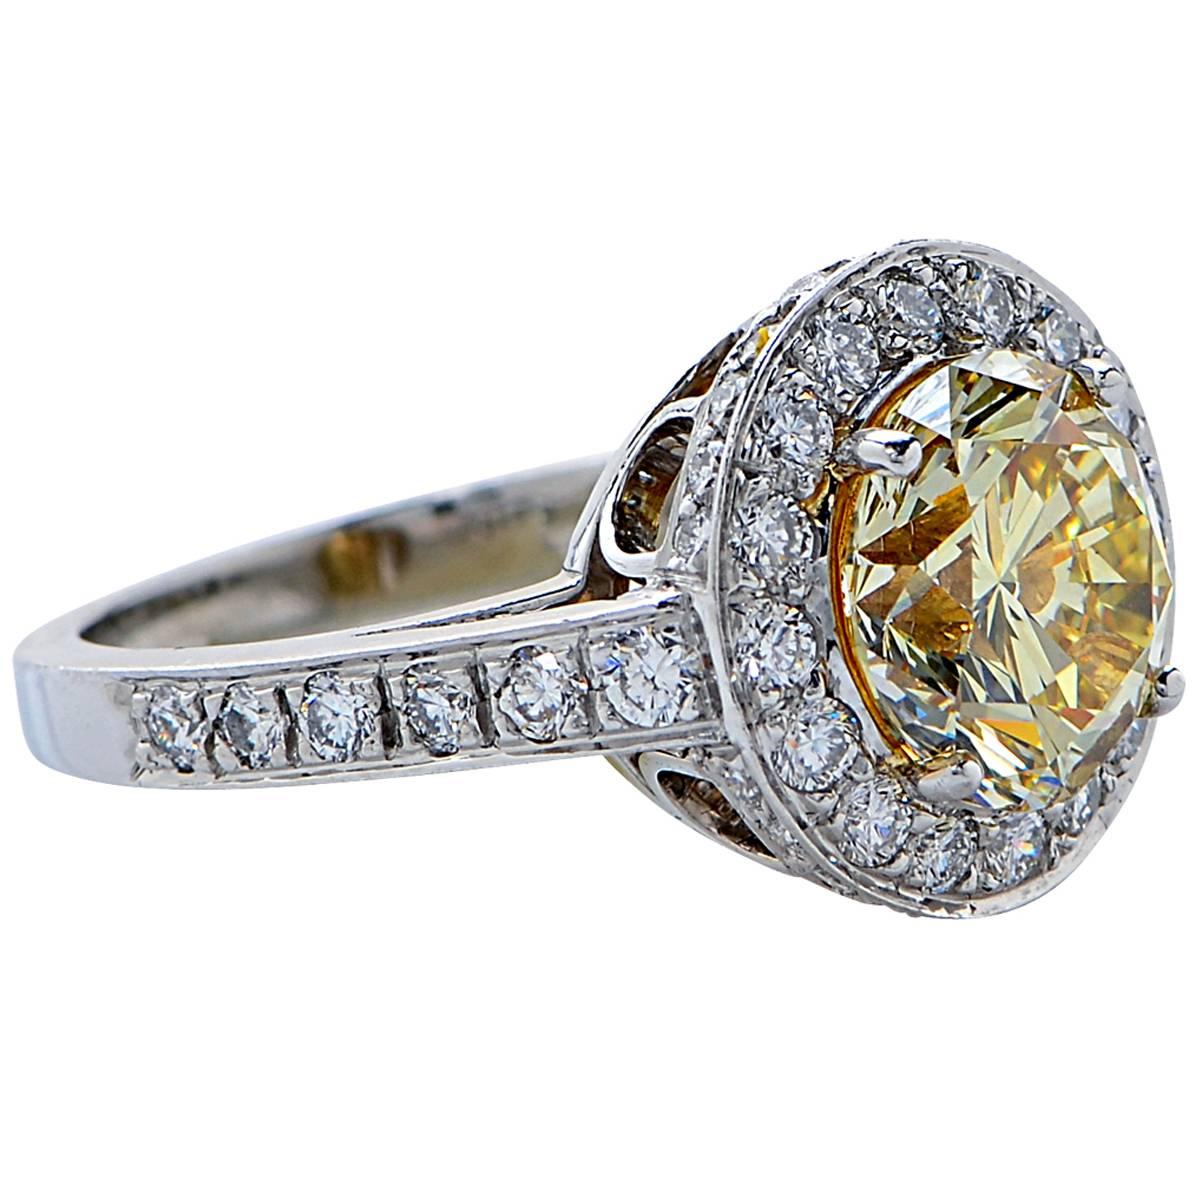 3.36 Carat GIA Graded Fancy Yellow Diamond Platinum Engagement Ring In Excellent Condition For Sale In Miami, FL